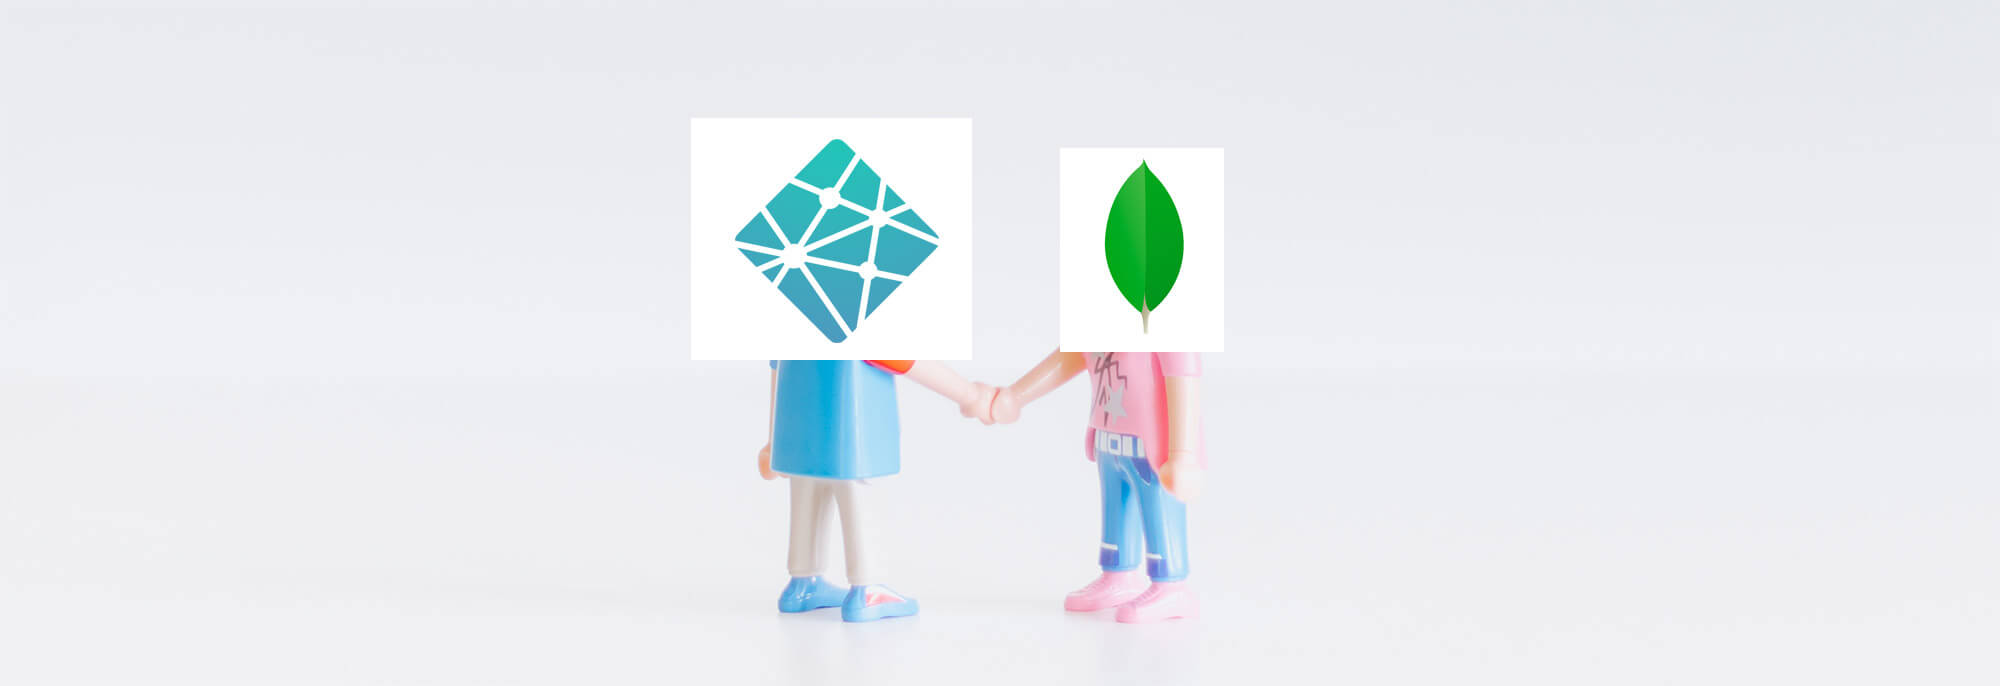 two people shaking hands, photoshopped to have their heads replaced by the Netlify and MongoDB logos